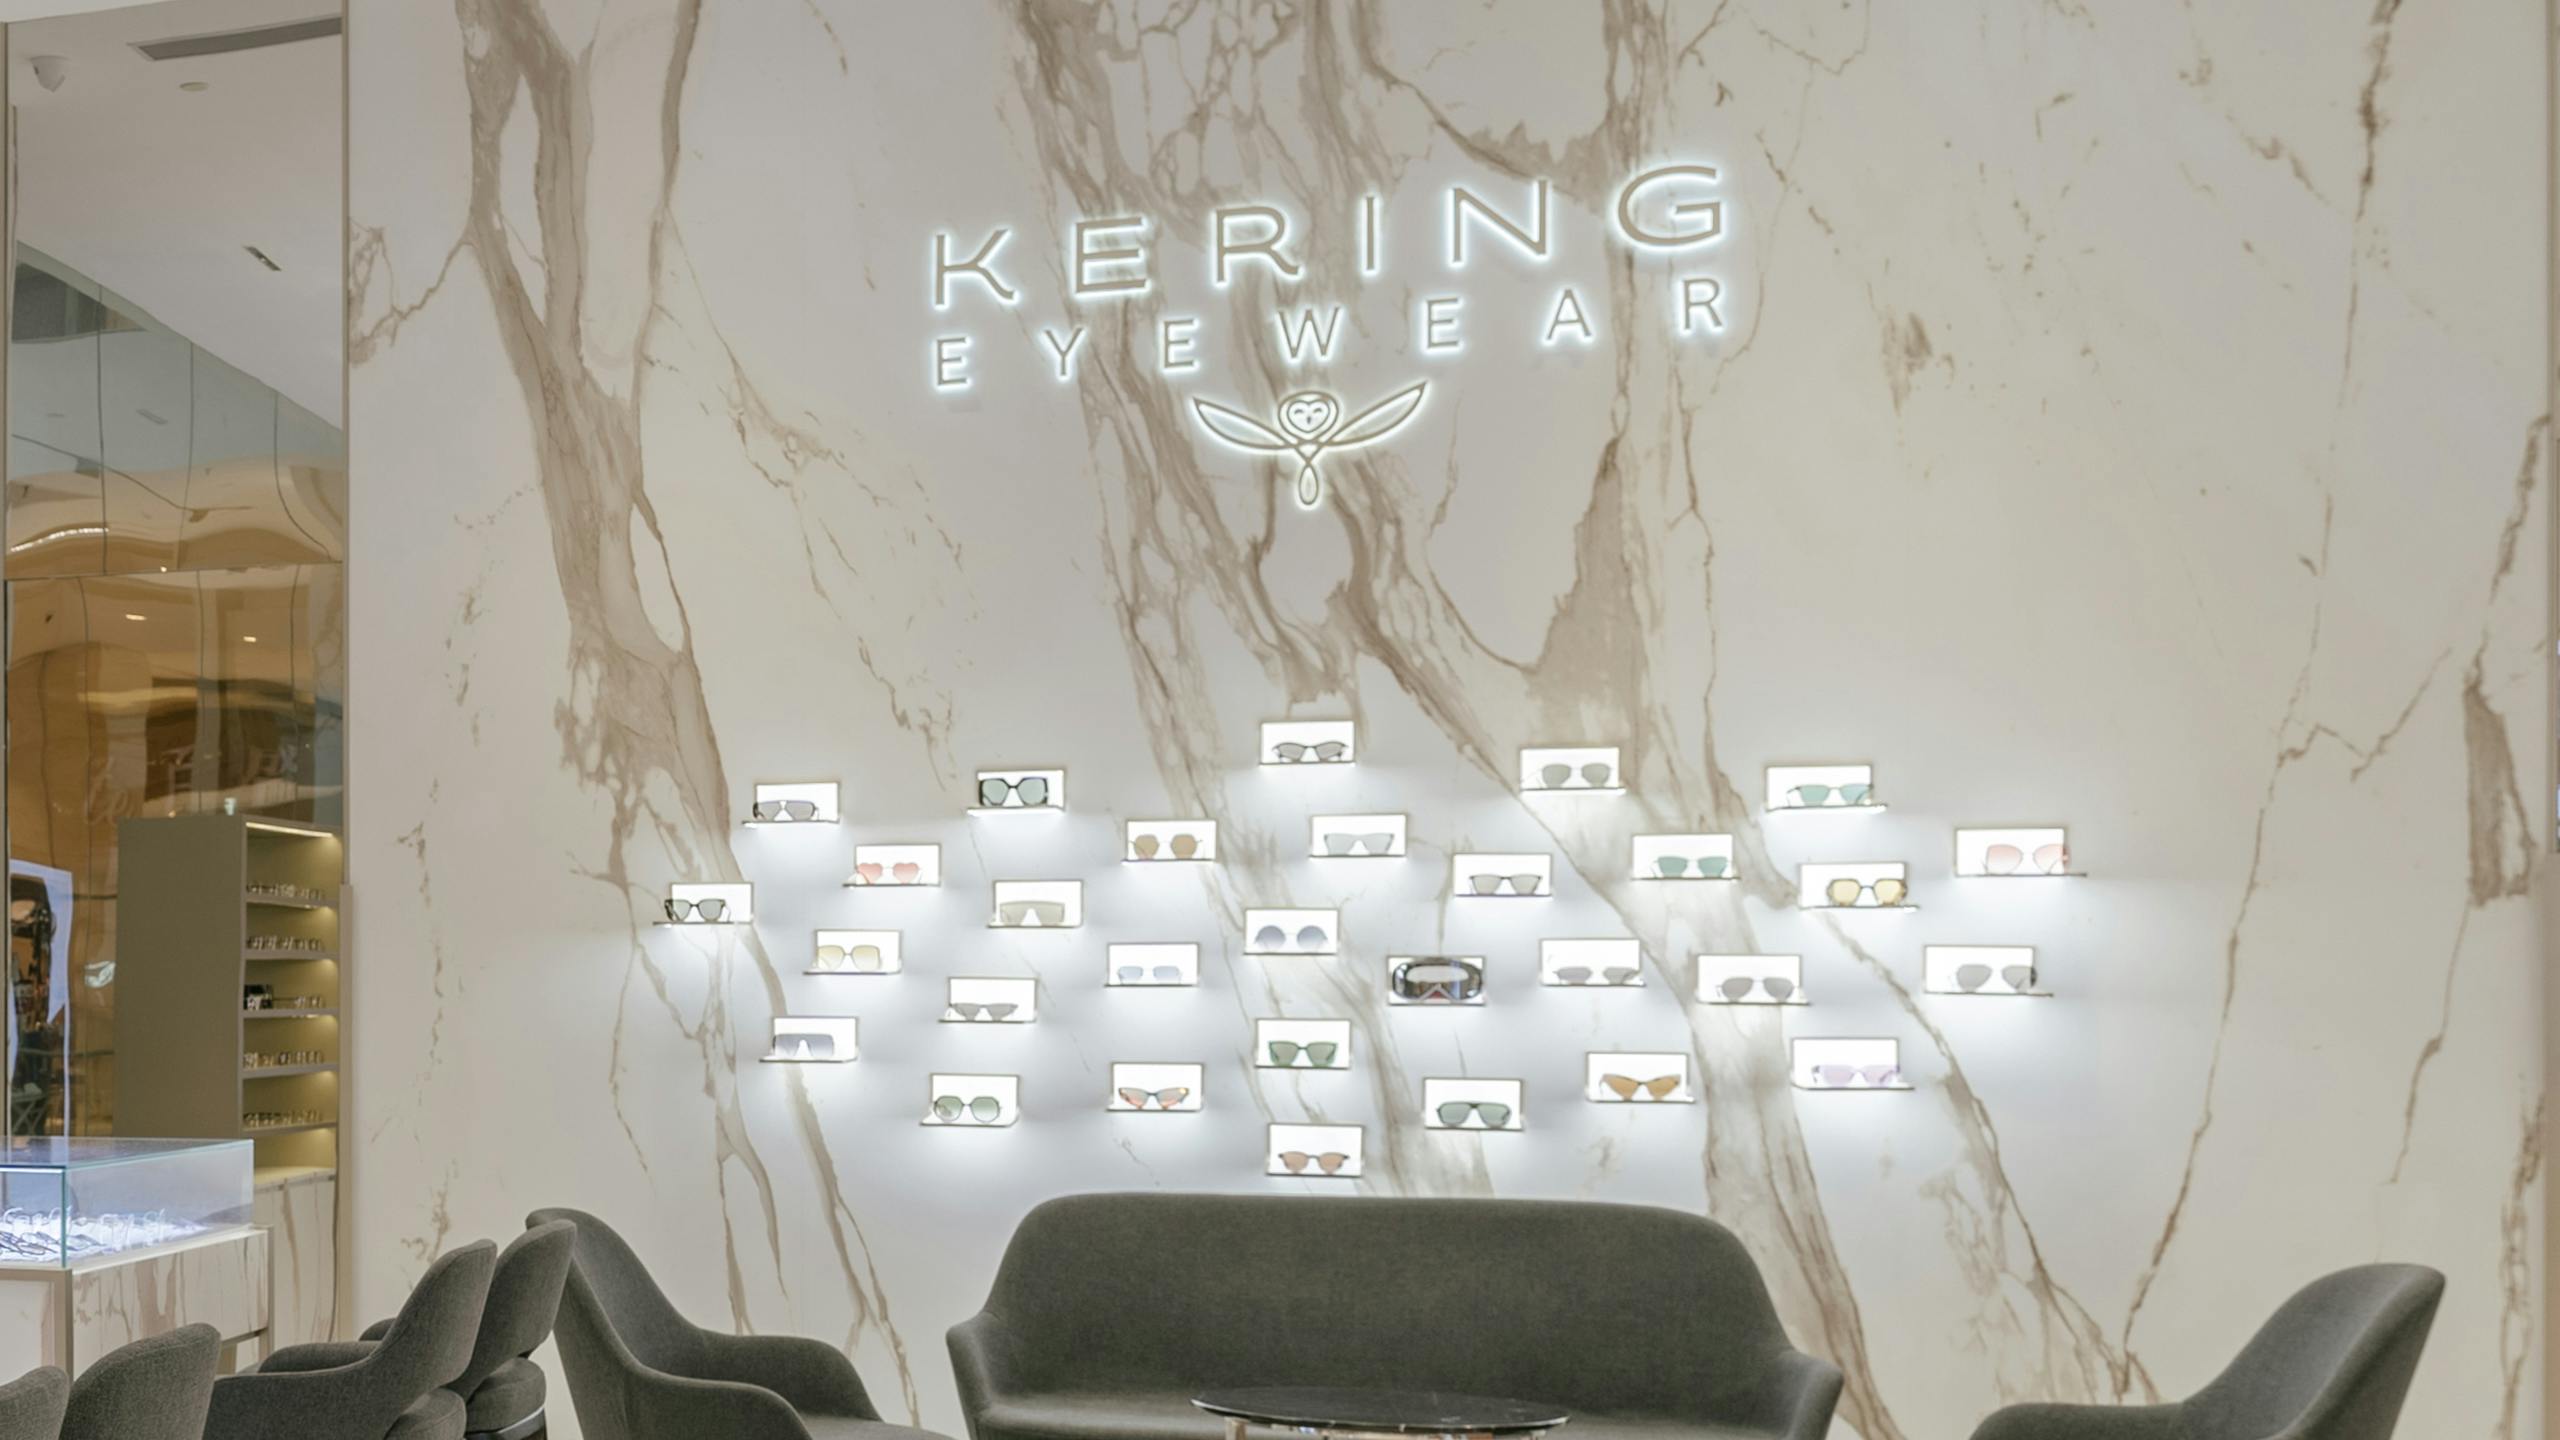 Kering Eyewear Opens First Concept Store in Malaysia